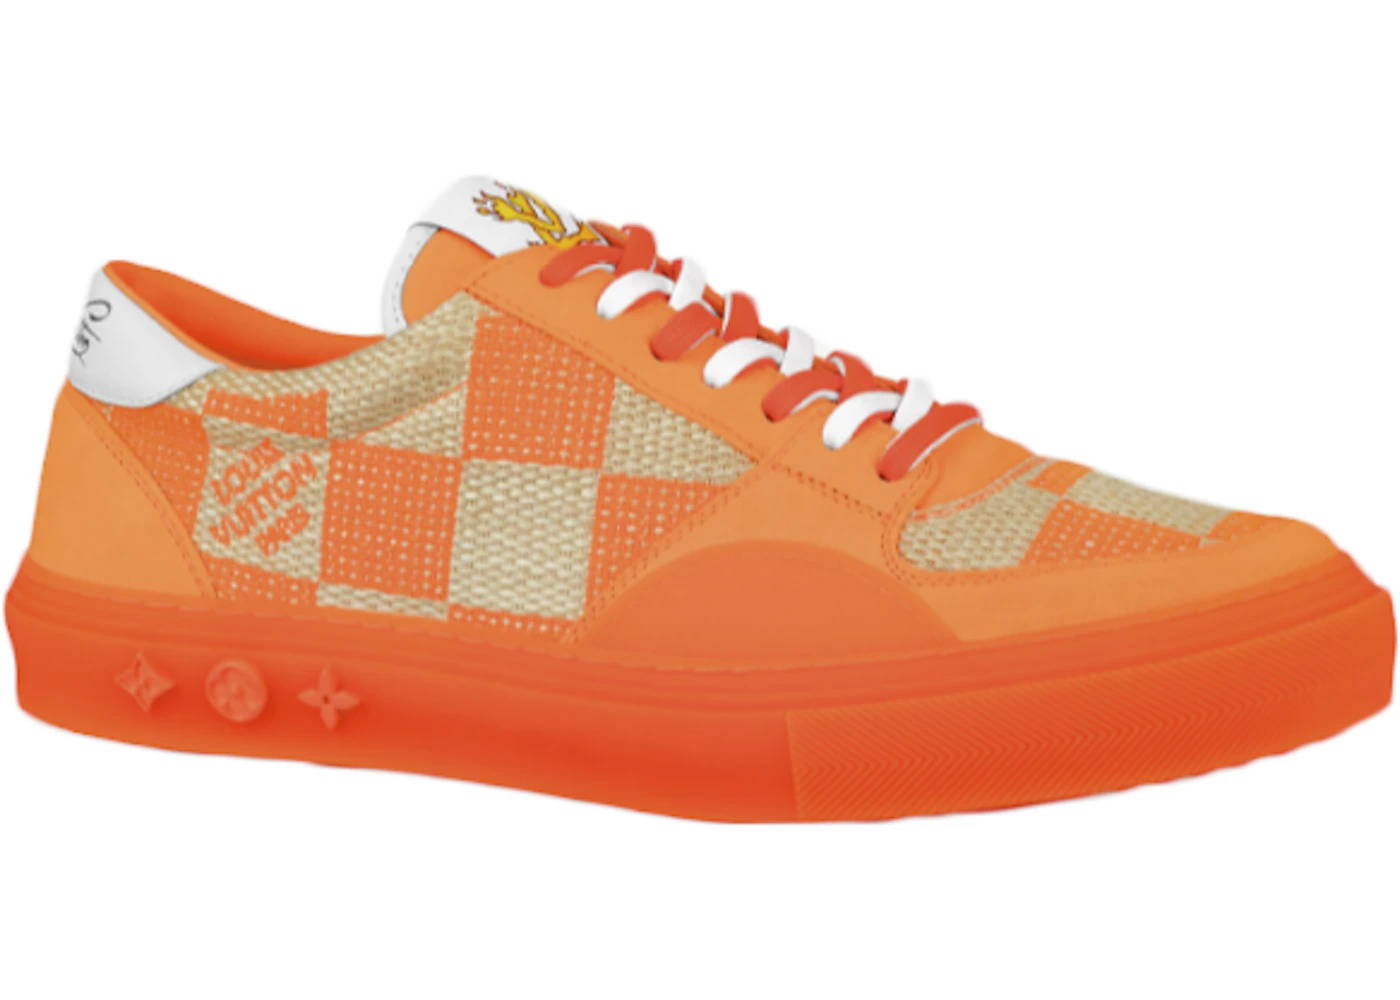 LV Ollie Yellow SS21  Sneakers, Louis vuitton sneakers, Hot sneakers